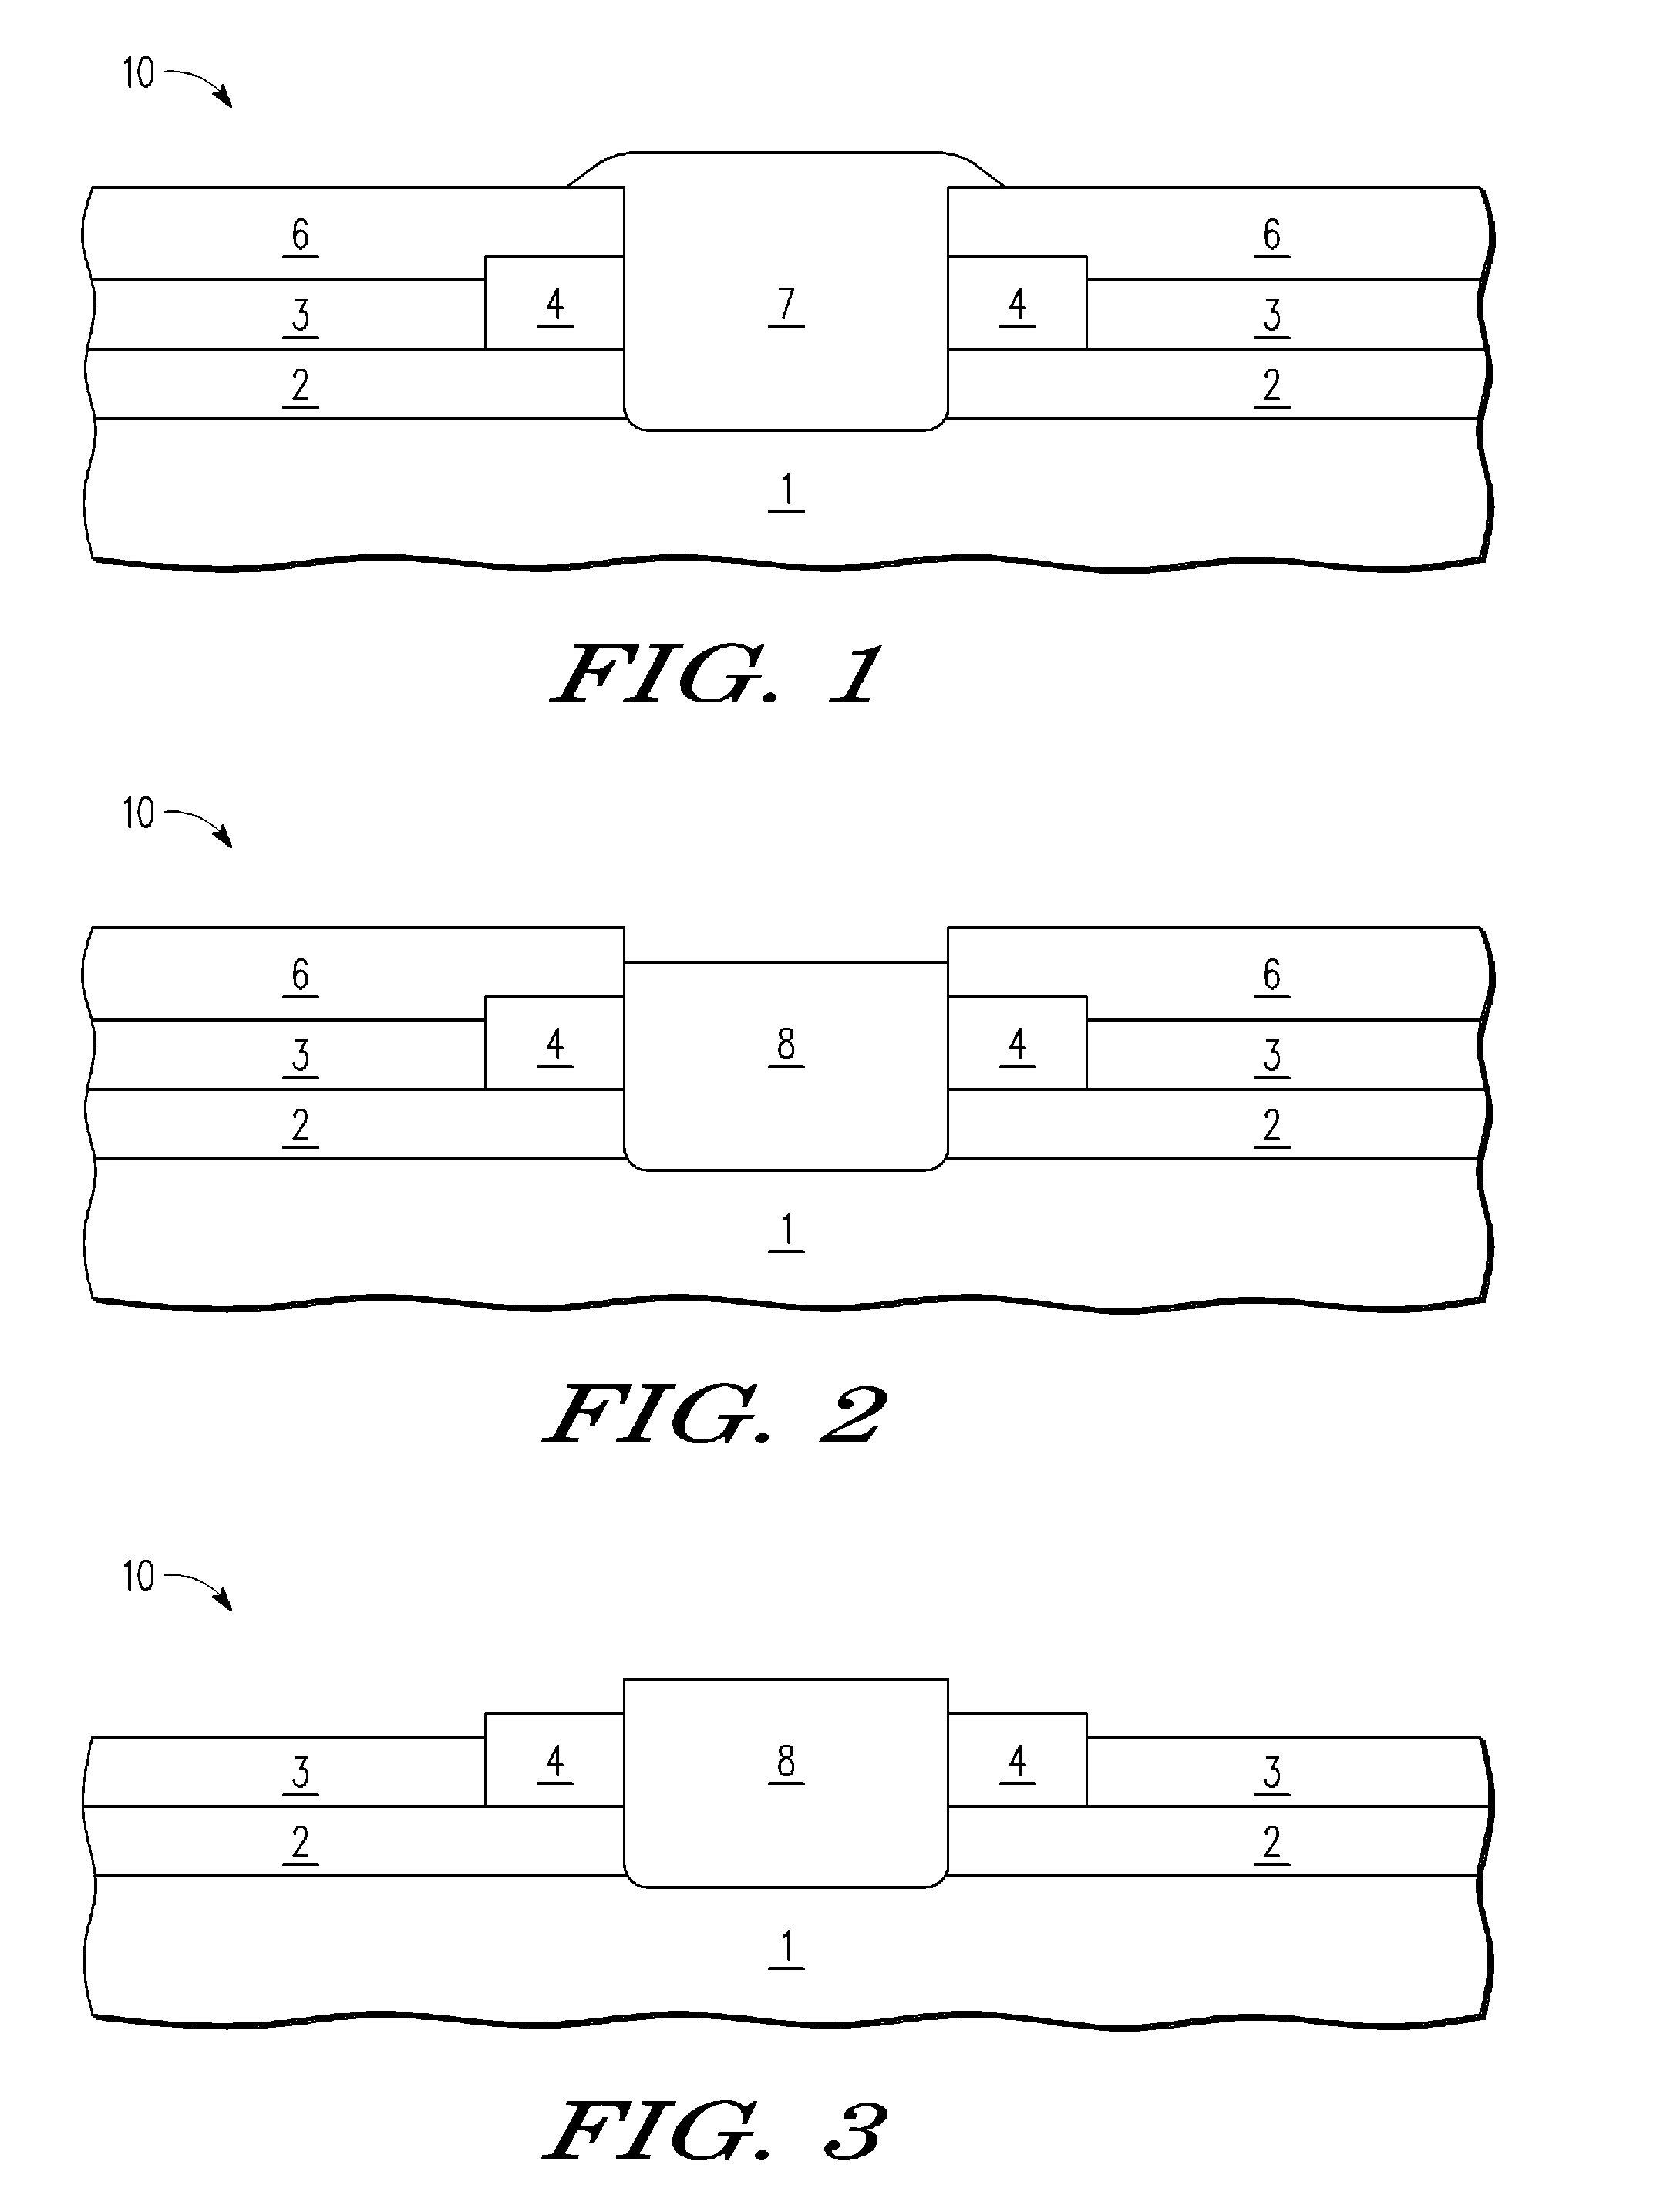 Inverse slope isolation and dual surface orientation integration